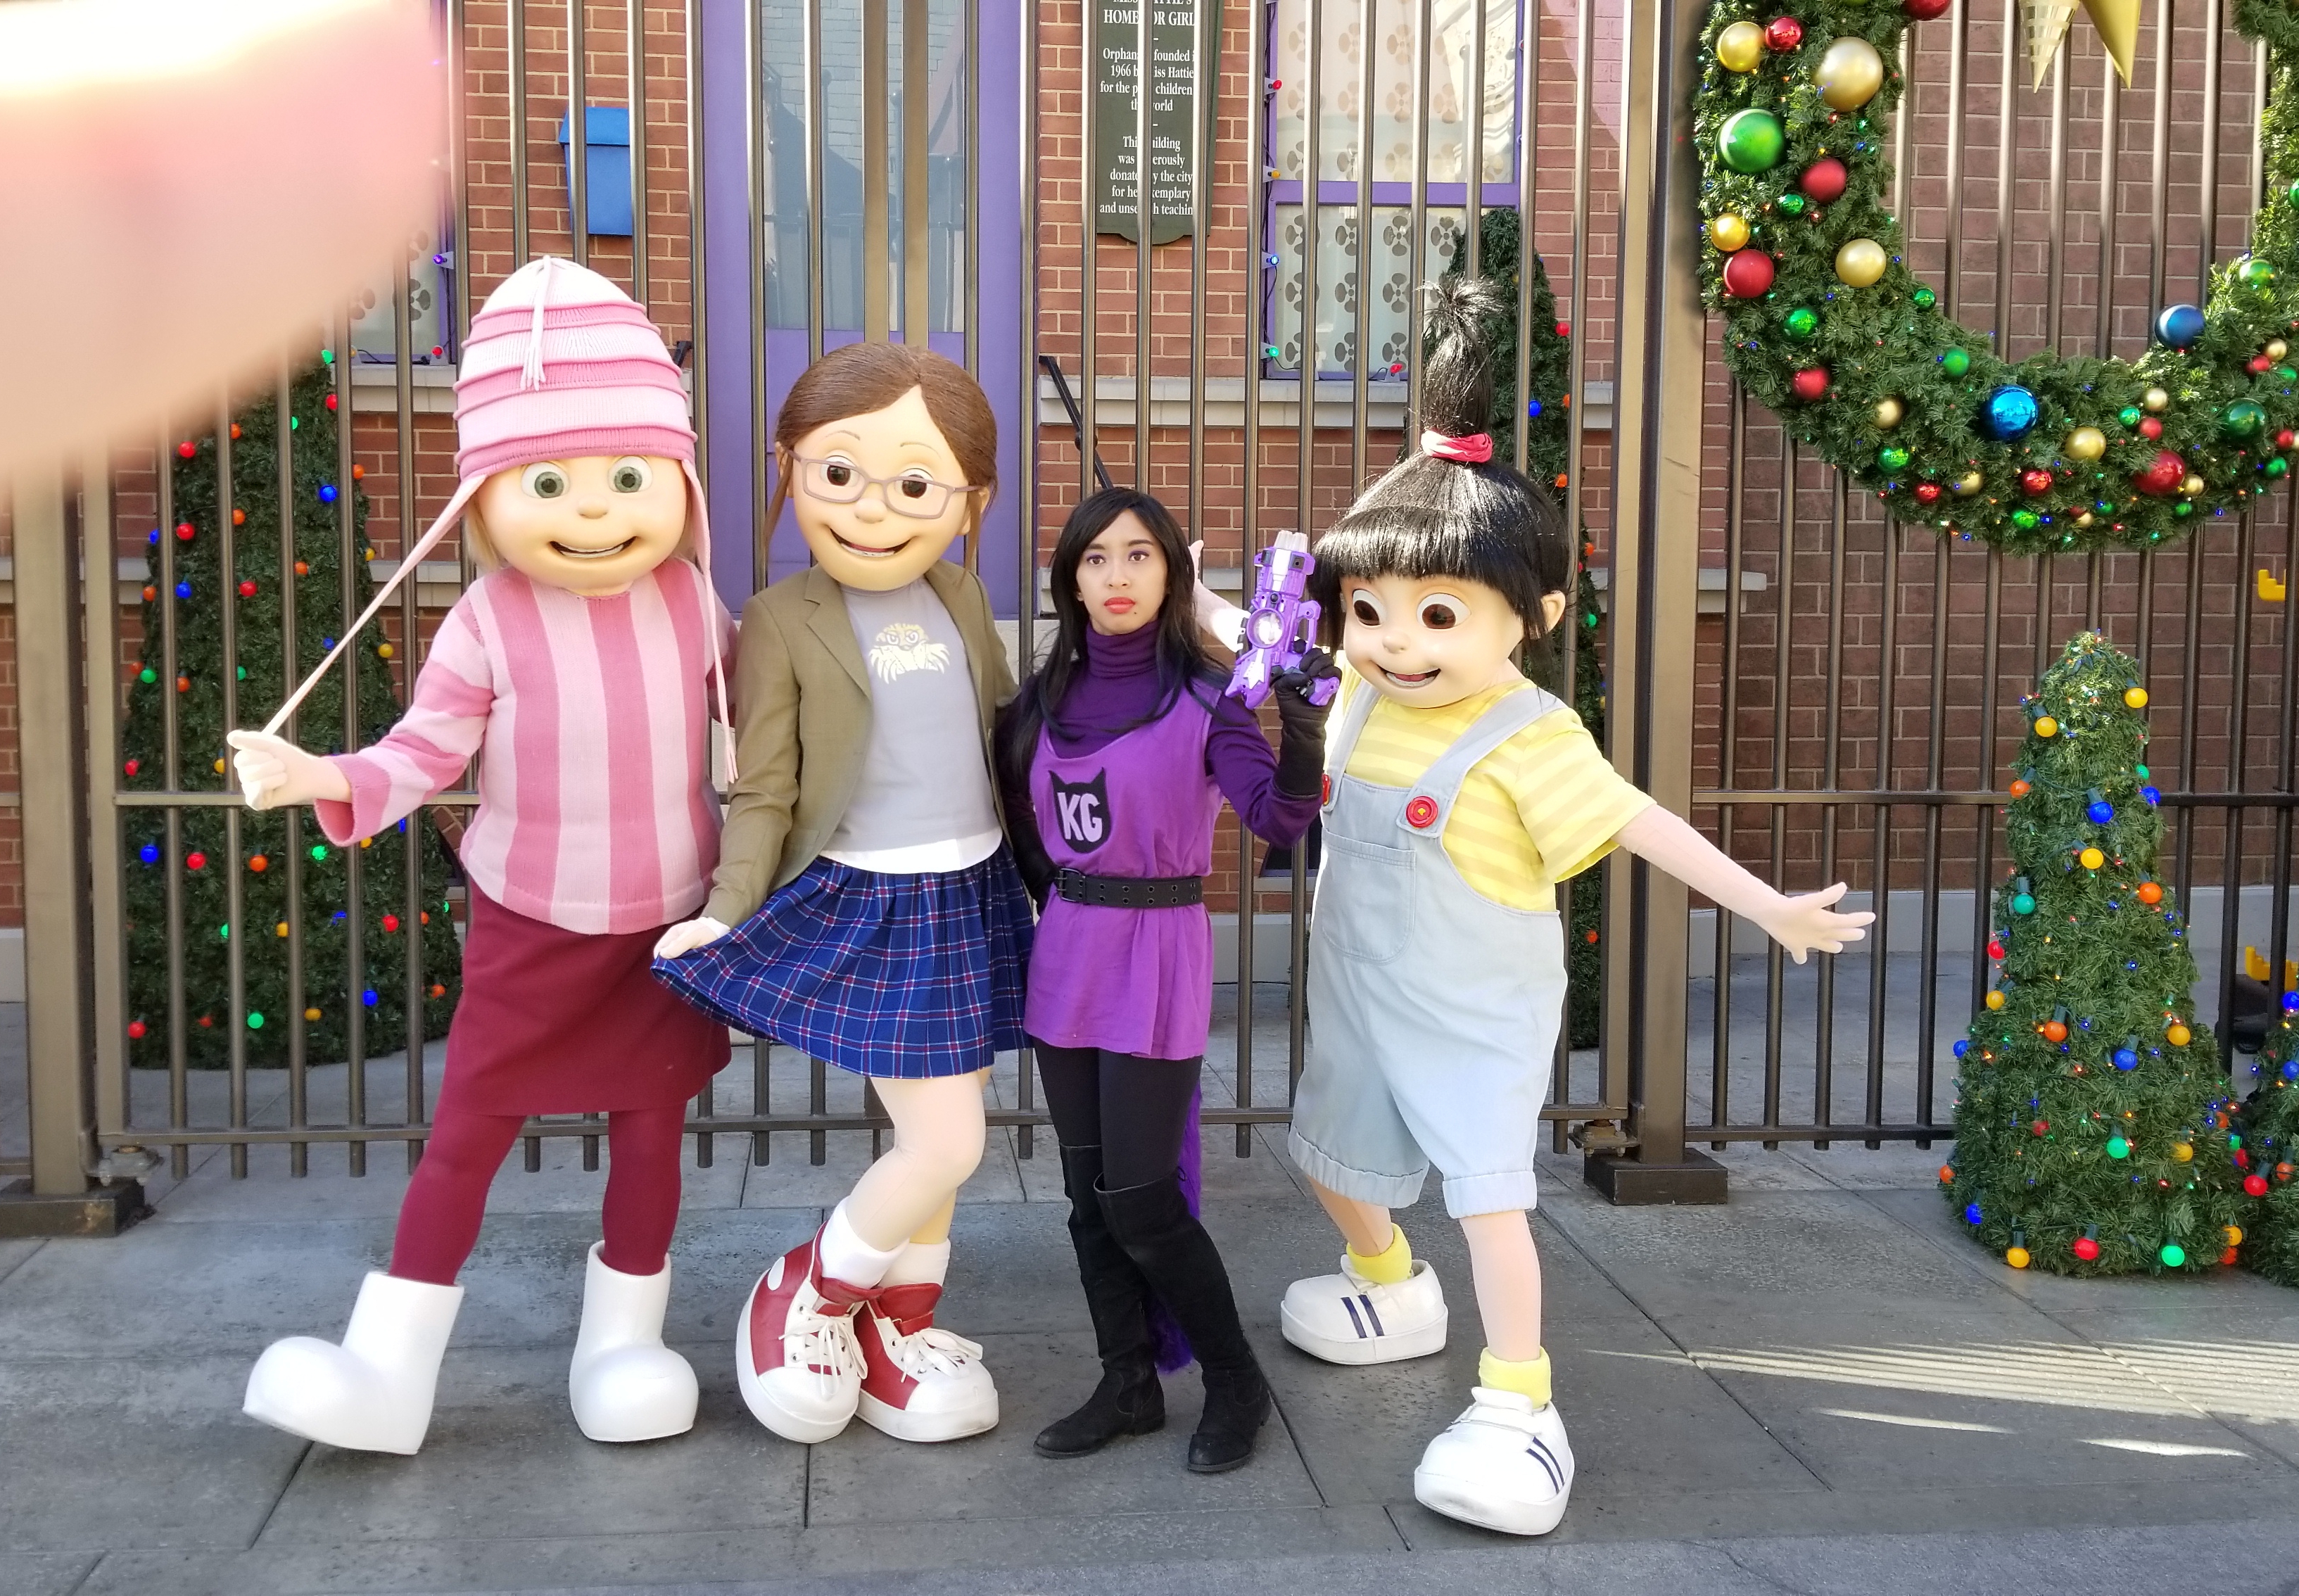 I As K Girl Met Margo Edith And Agnes Gru At Ush By Magic Kristina Kw On Deviantart